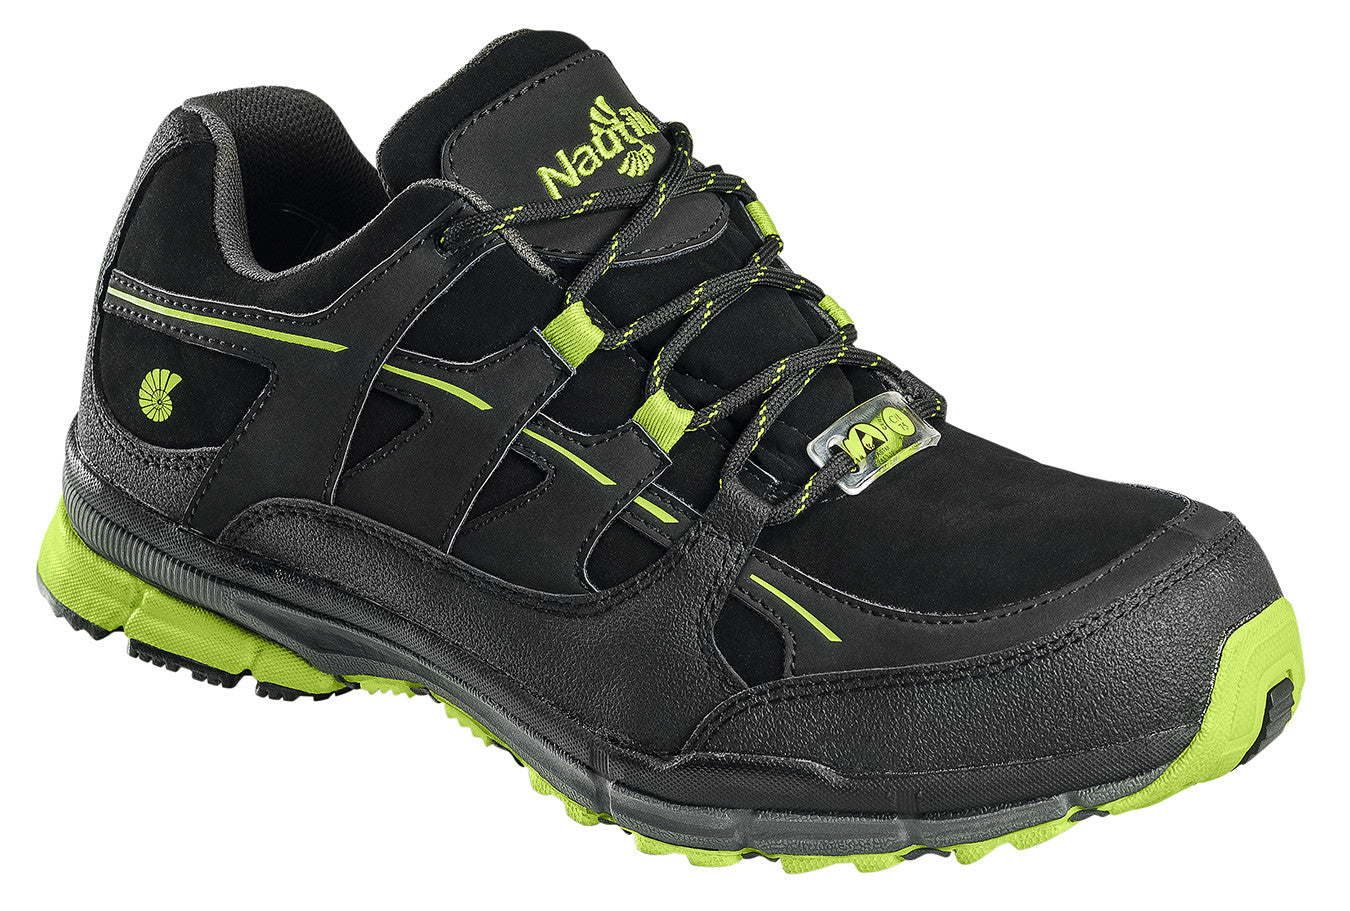 ESD No Exposed Metal Safety Toe Athletic